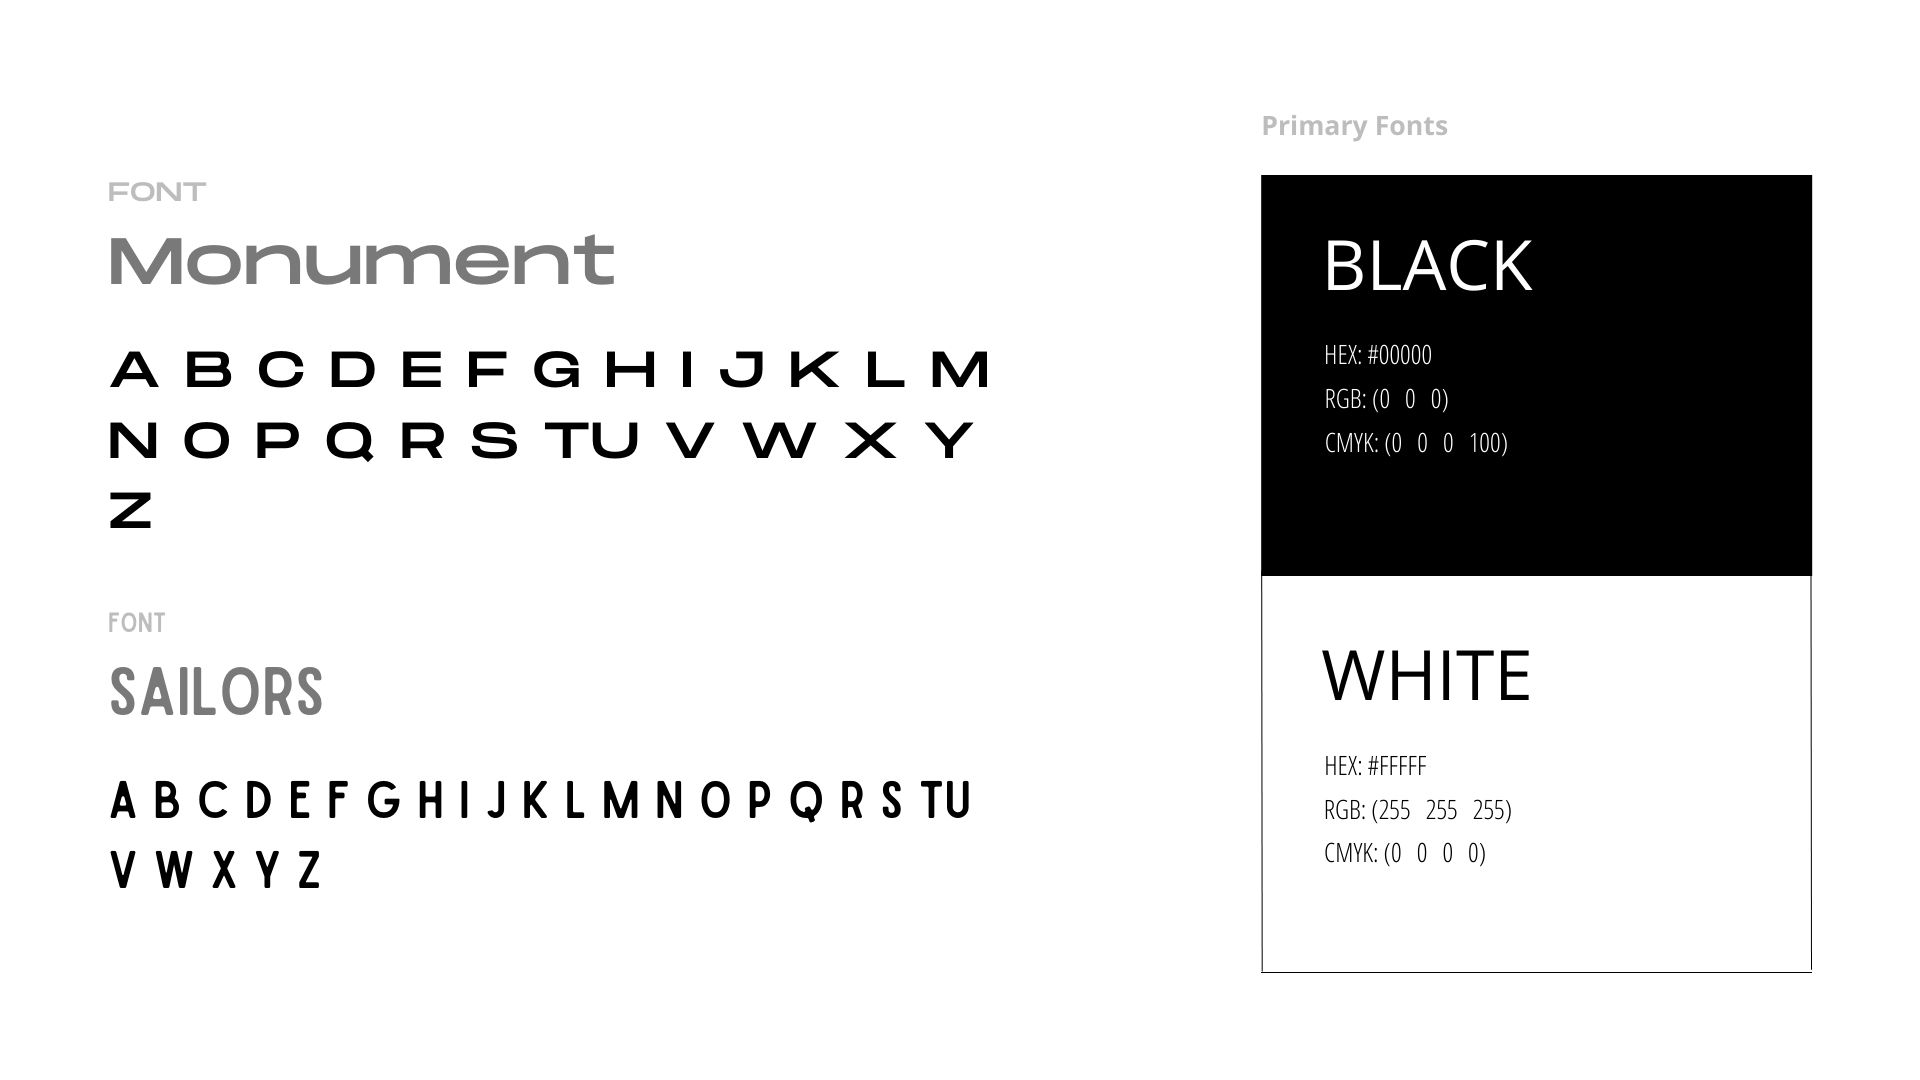 Clothing Brand Font and Colors